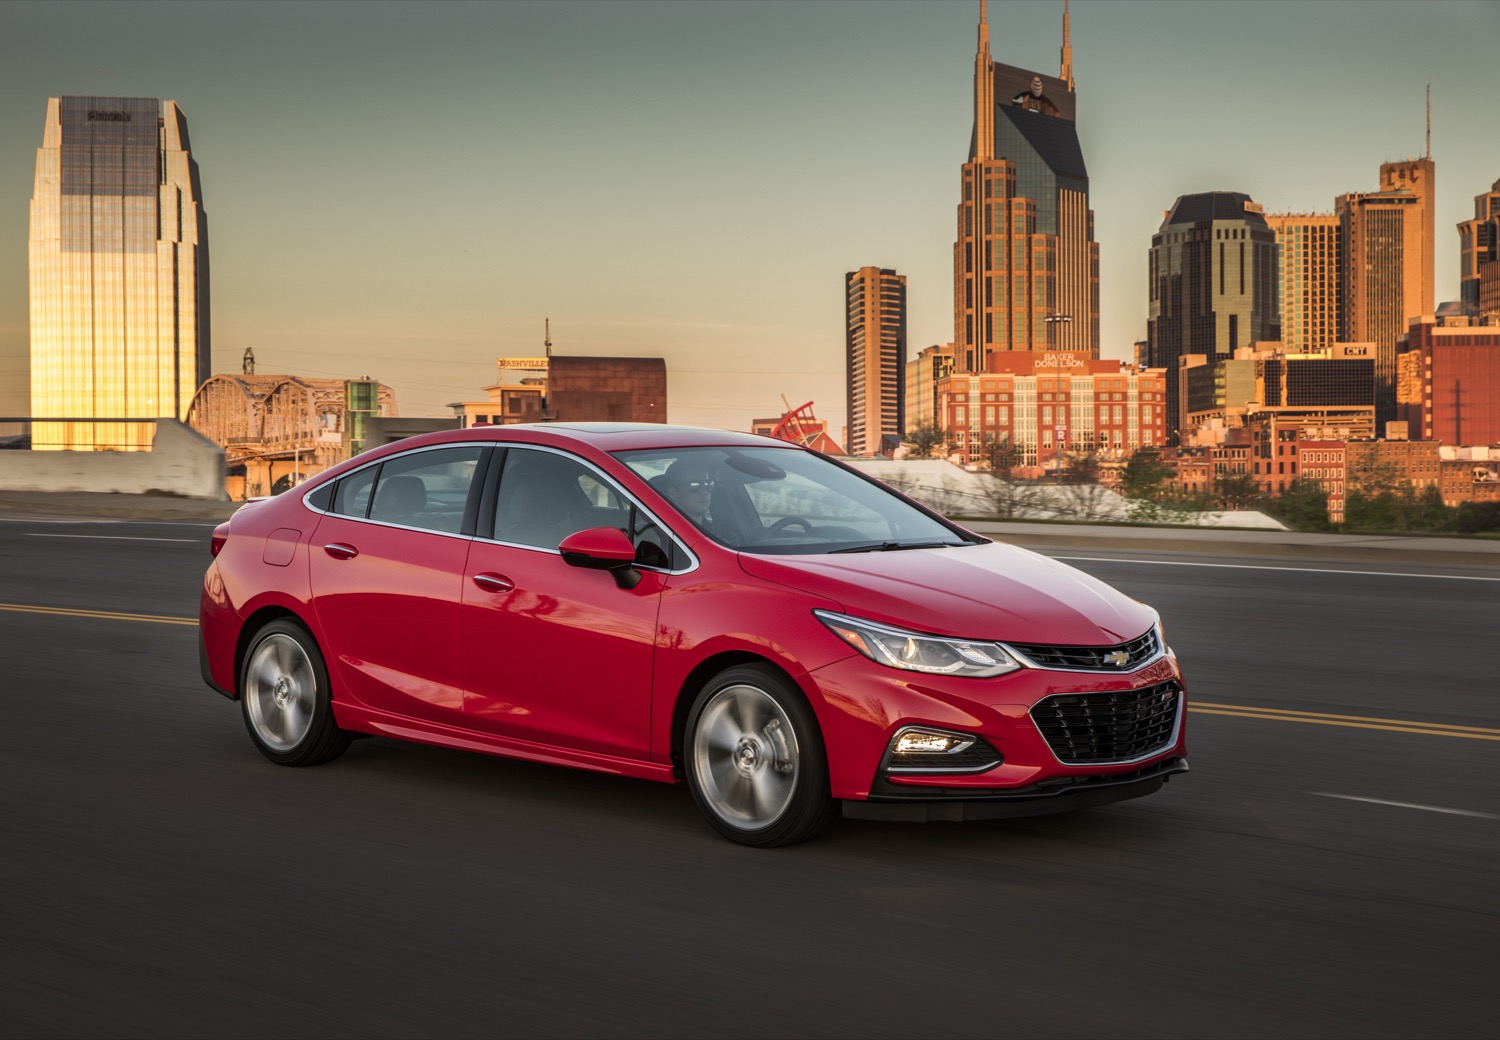 First Drive: 2016 Chevrolet Cruze